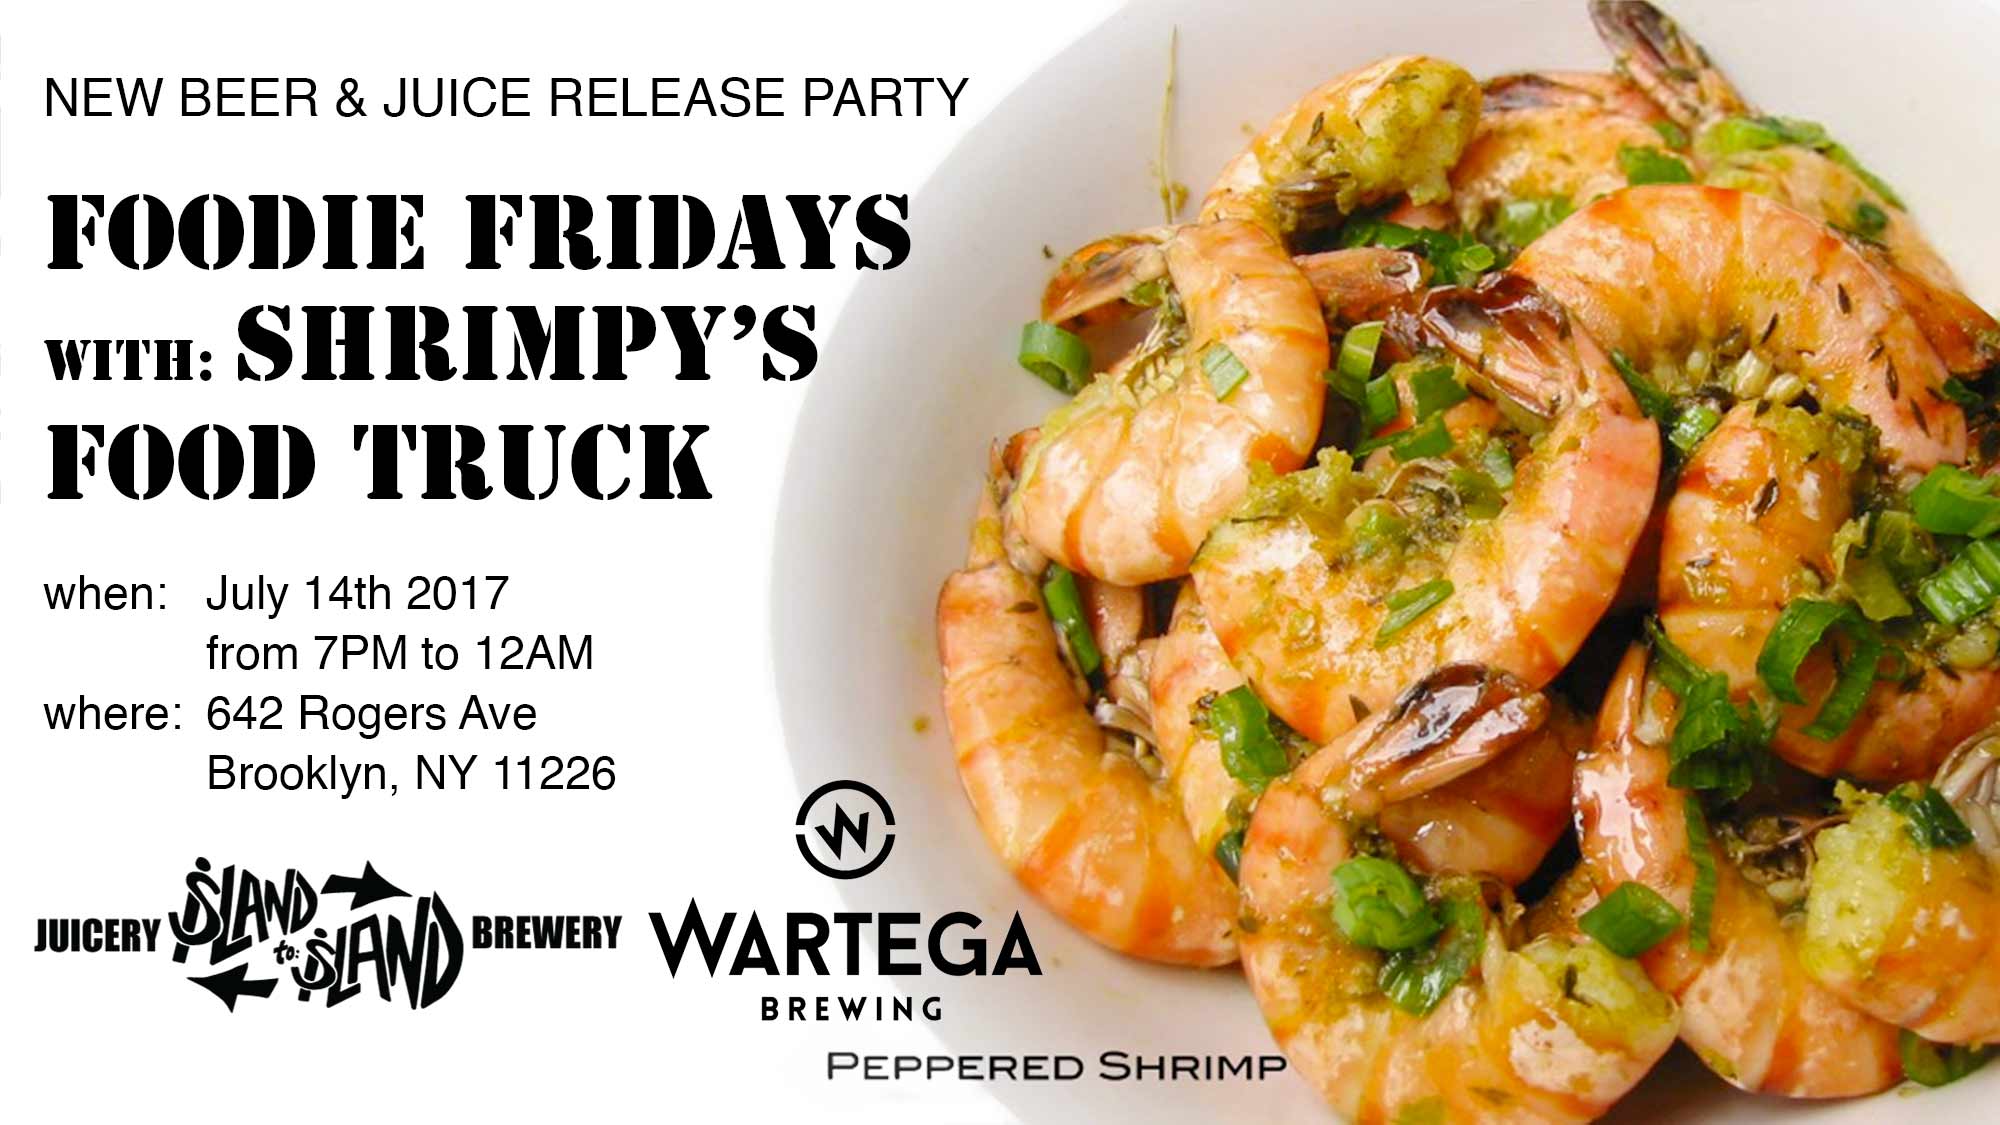 Foodie Fridays with Shrimpy's and Wartega